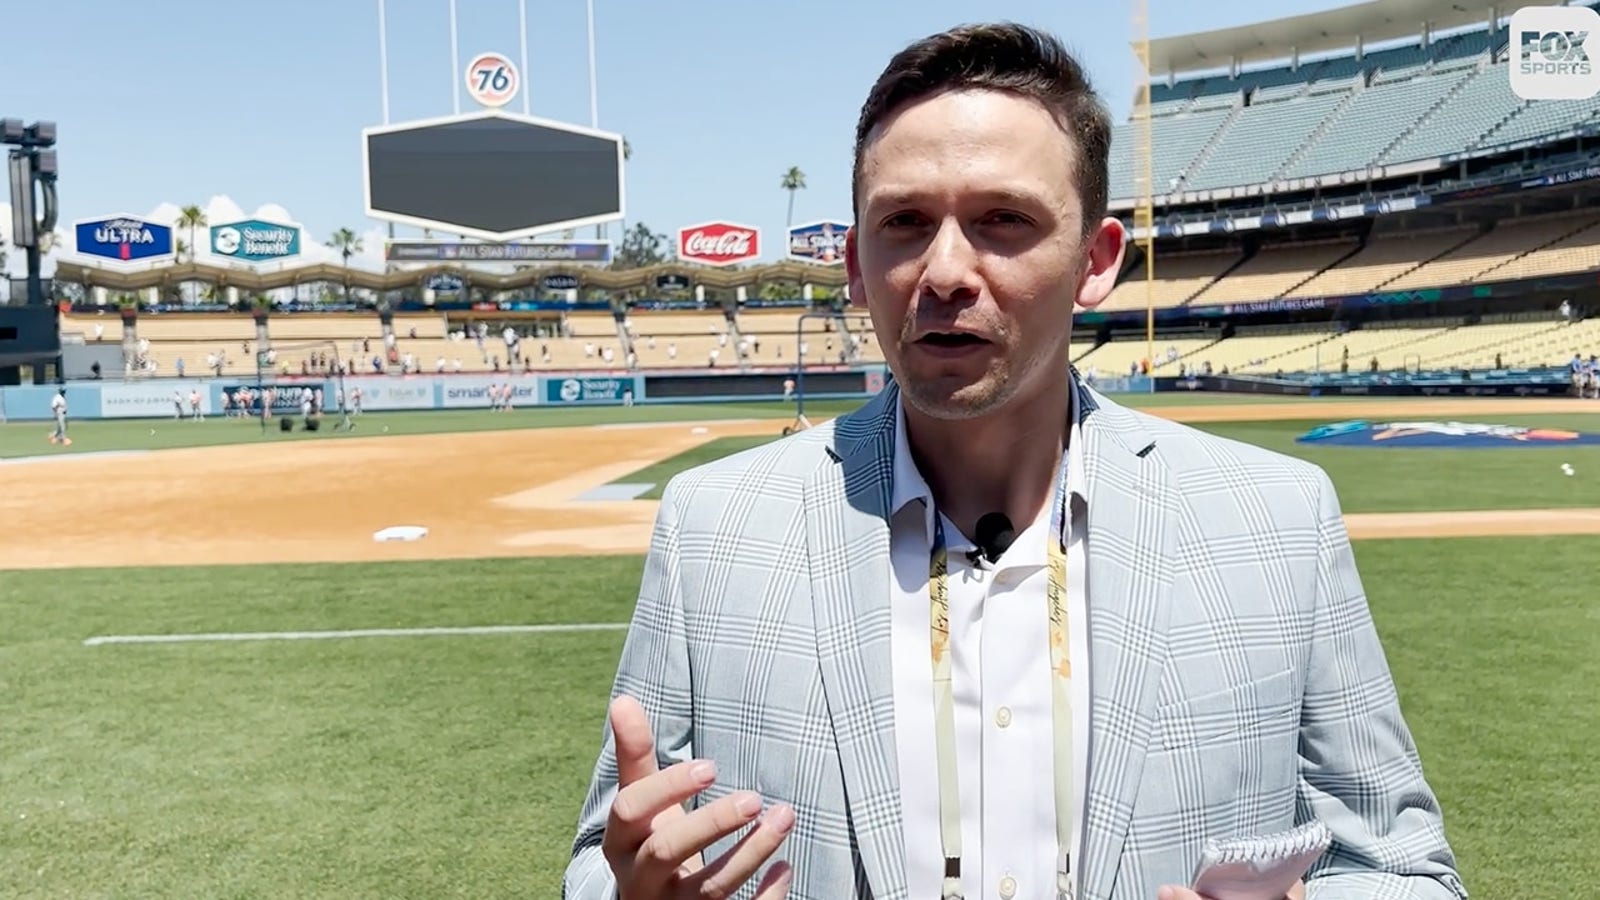 MLB All-Star Game: An exclusive tour of Dodger Stadium